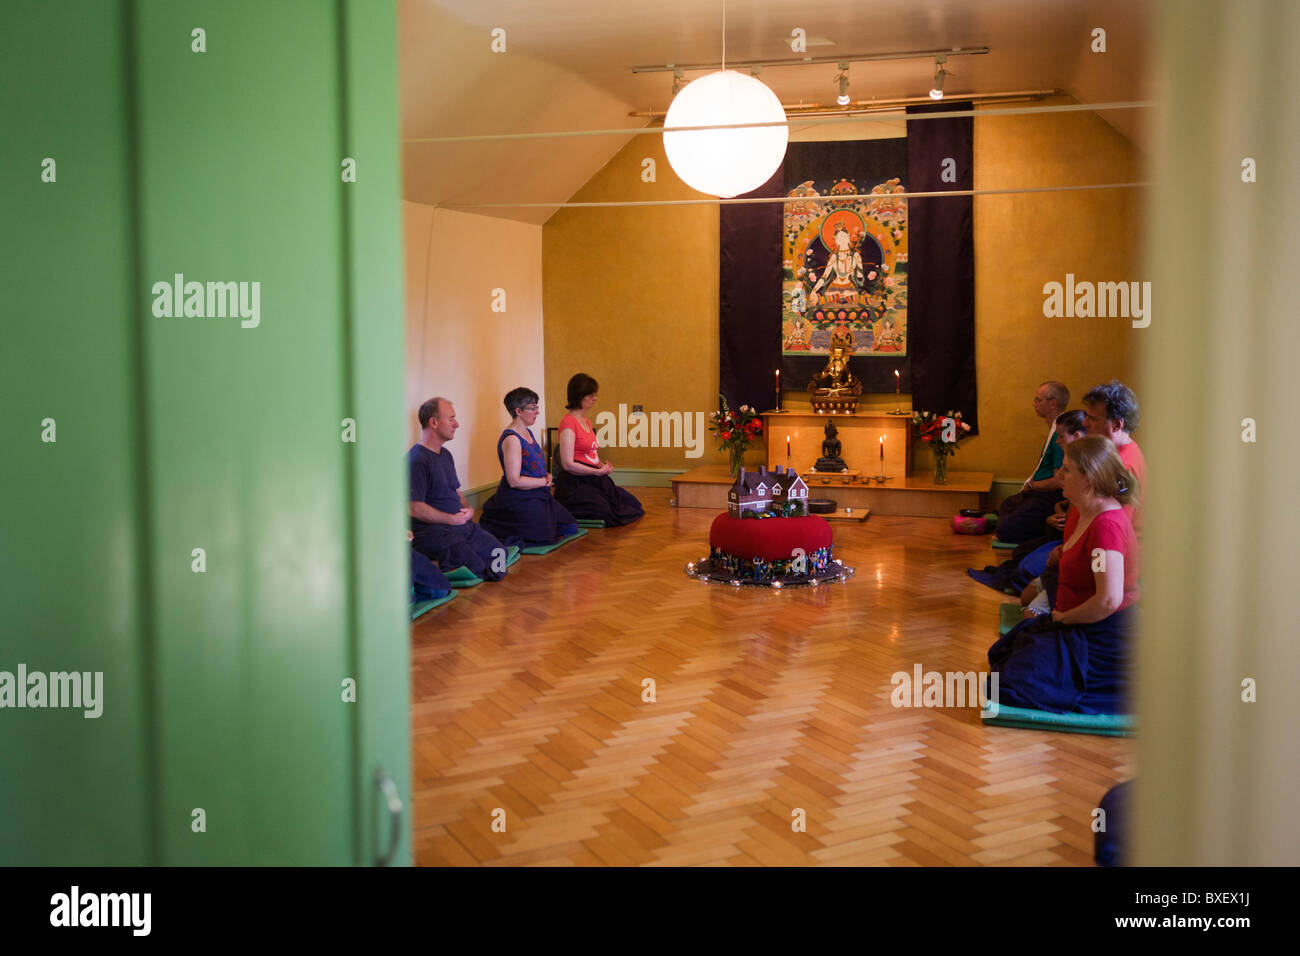 Buddhists meditate in silence for 30 minutes in their Shrine Room at the Rivendell Buddhist Retreat Centre, England. Stock Photo